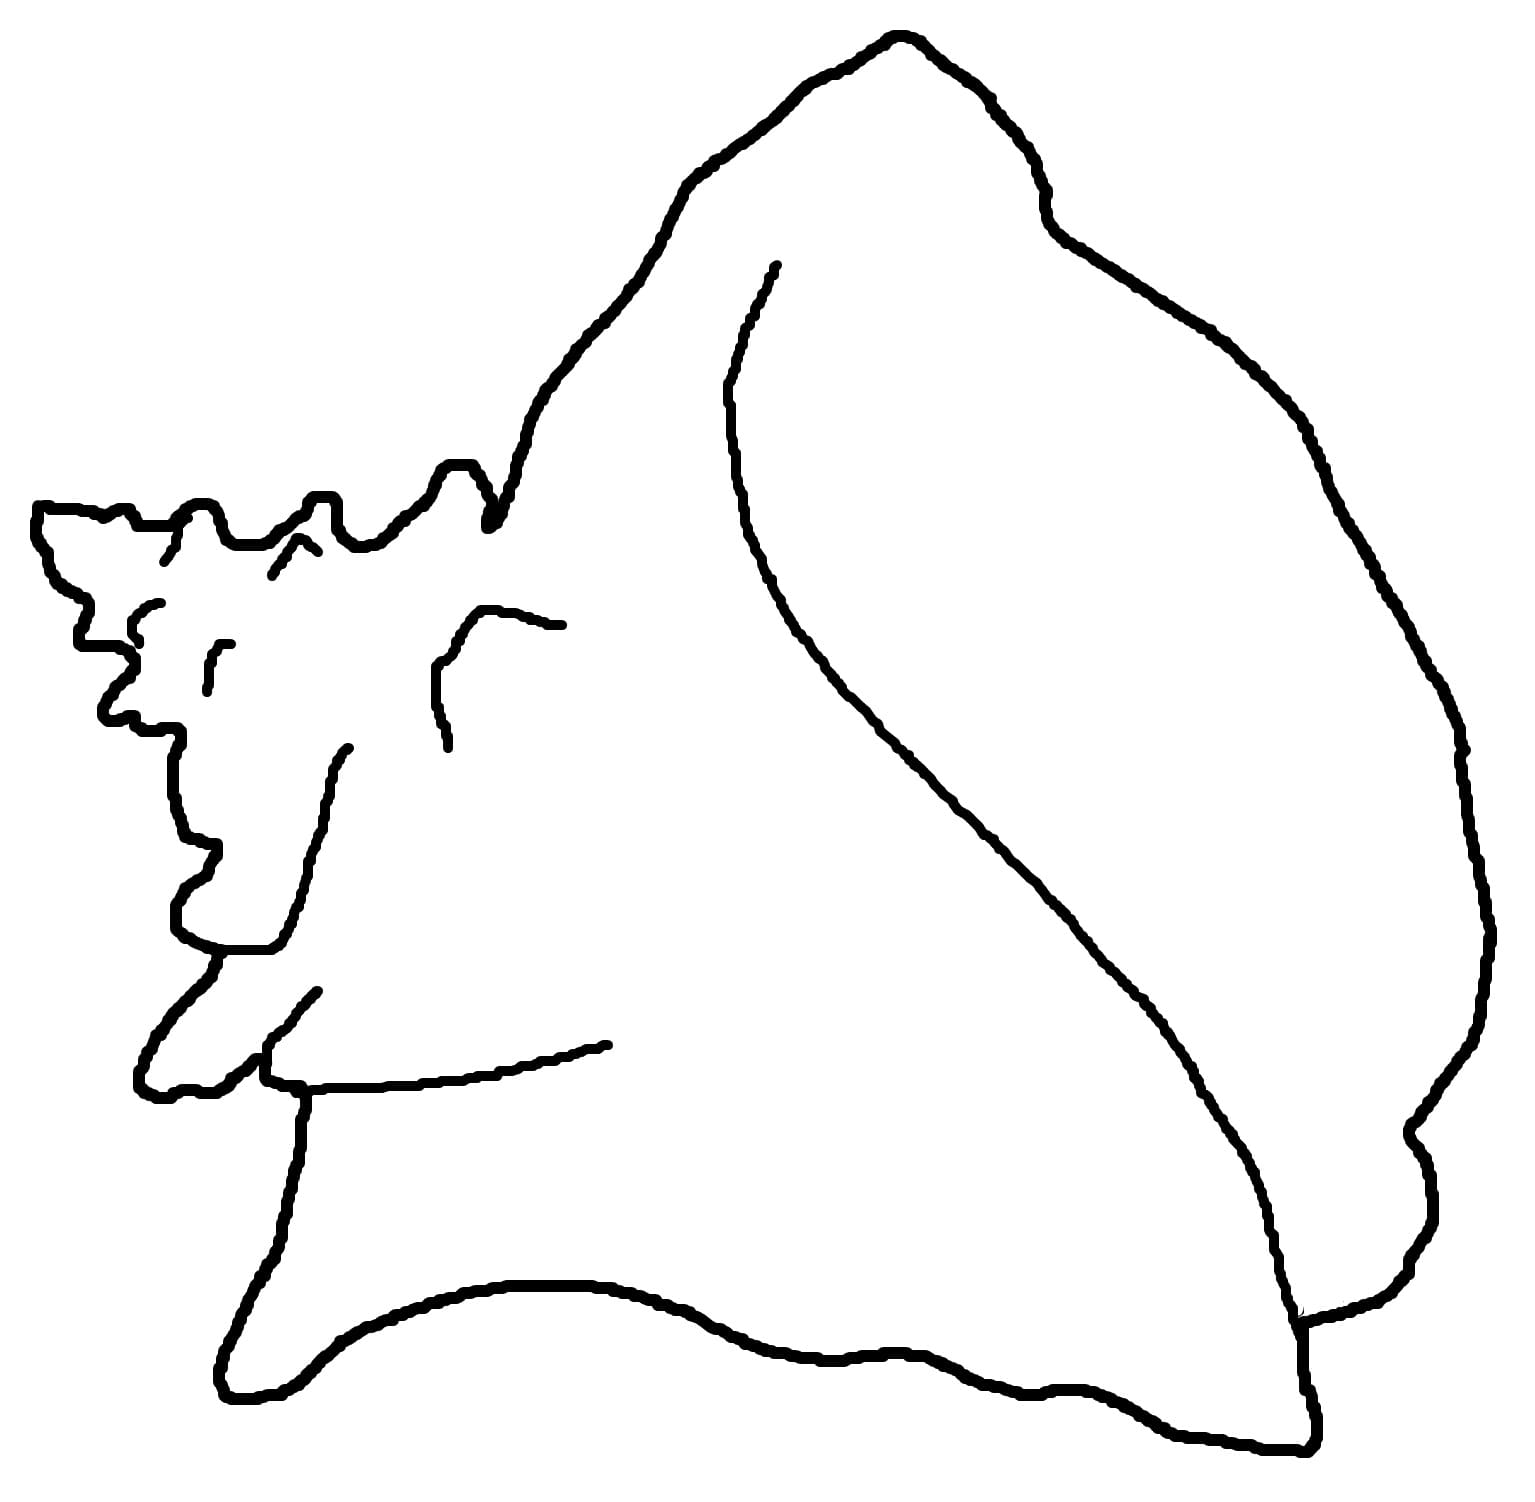 Conch Shell Image